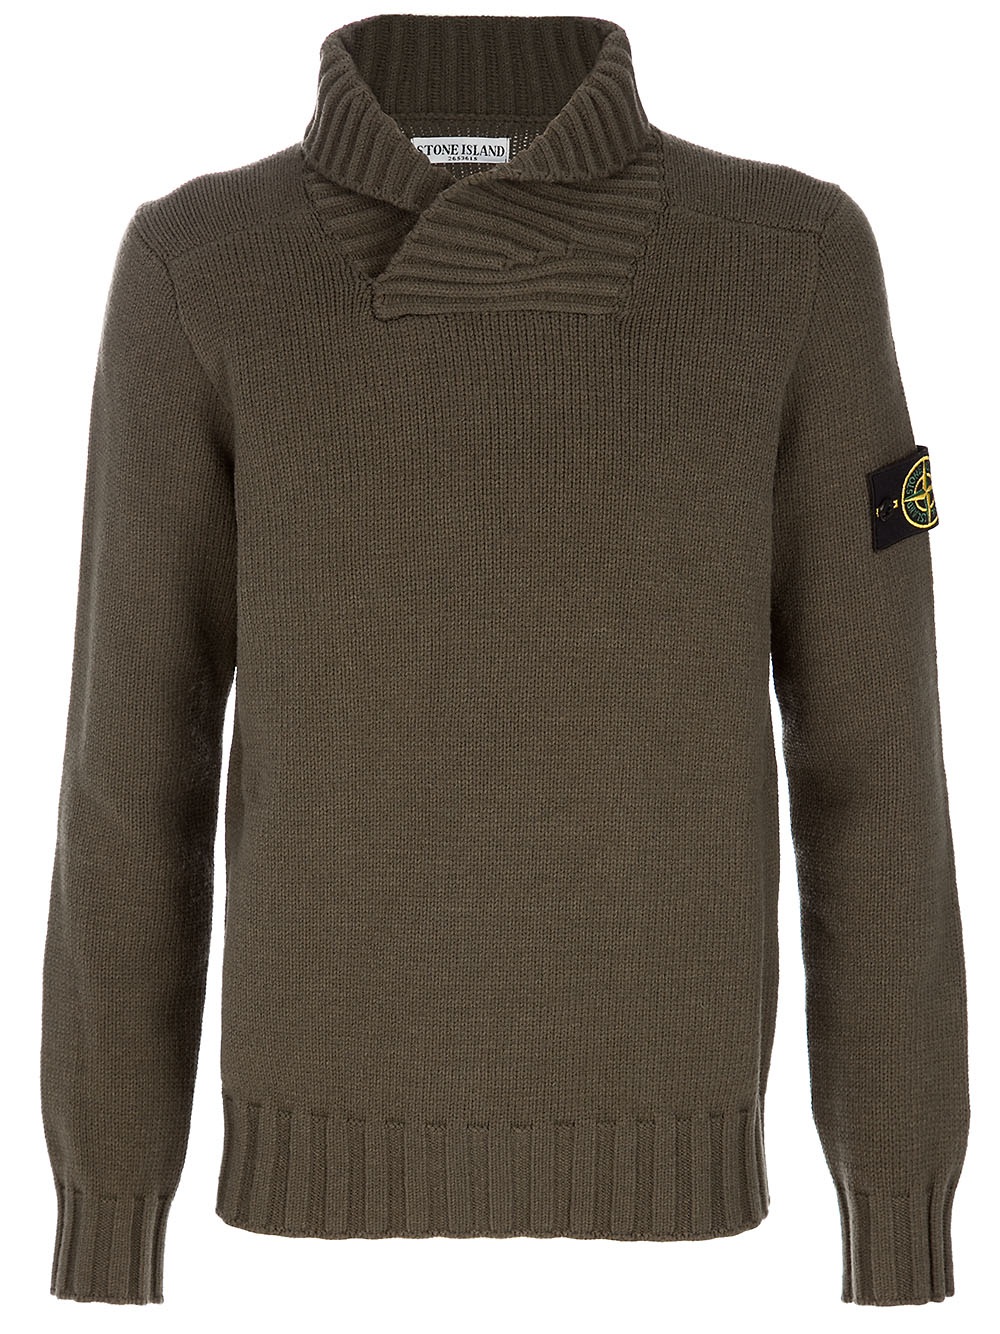 Stone island Roll Neck Sweater in Green for Men | Lyst